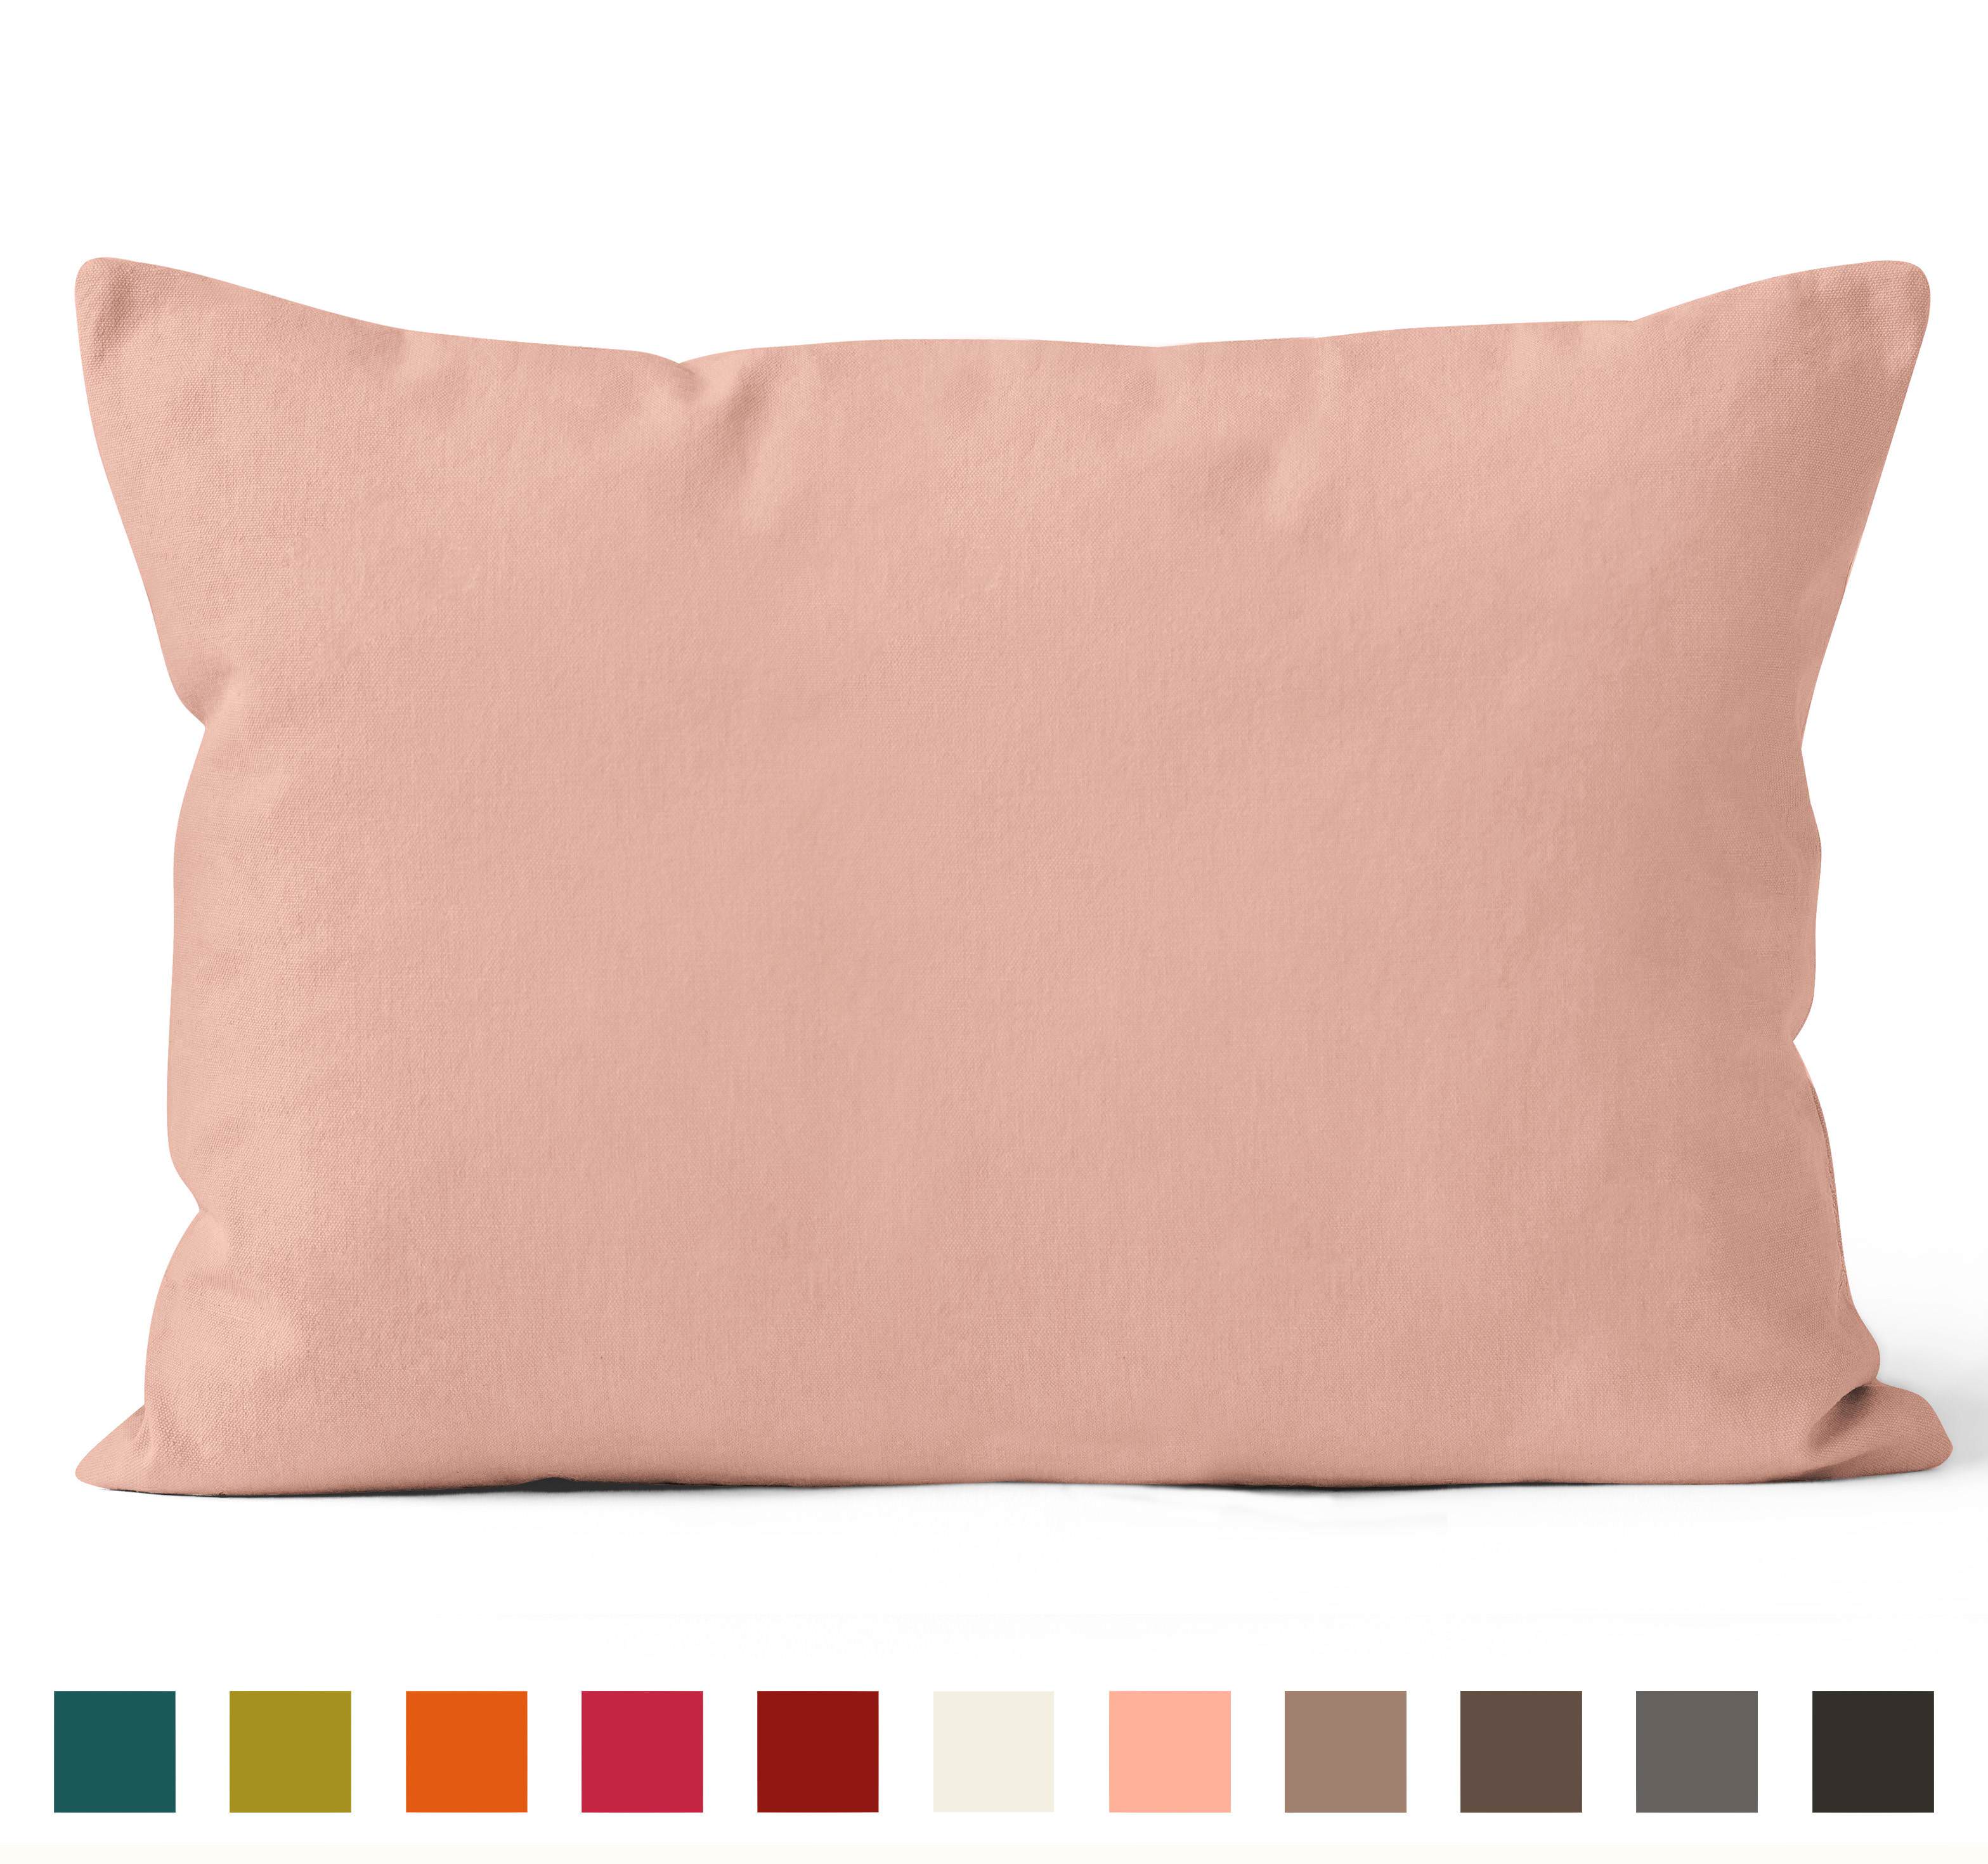 Encasa Homes Dyed Cotton Canvas Cushion Cover (Choose with or without fillers) - 30x50 cm, Powder Pink